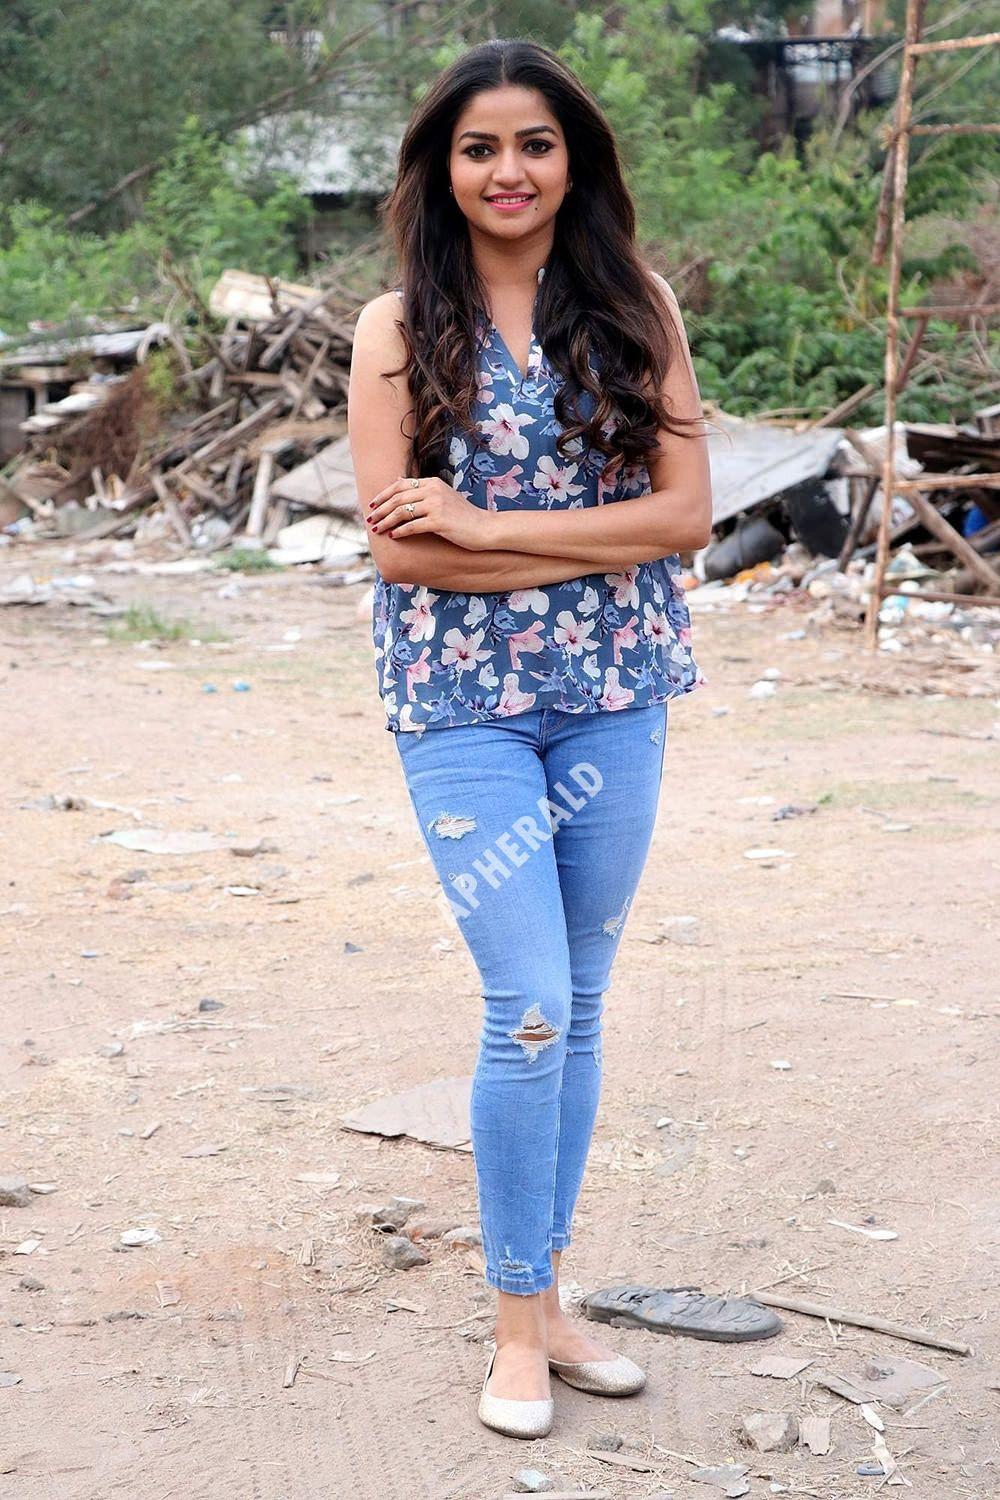 Nithya Ram's latest photoshoot for Silver screen debut